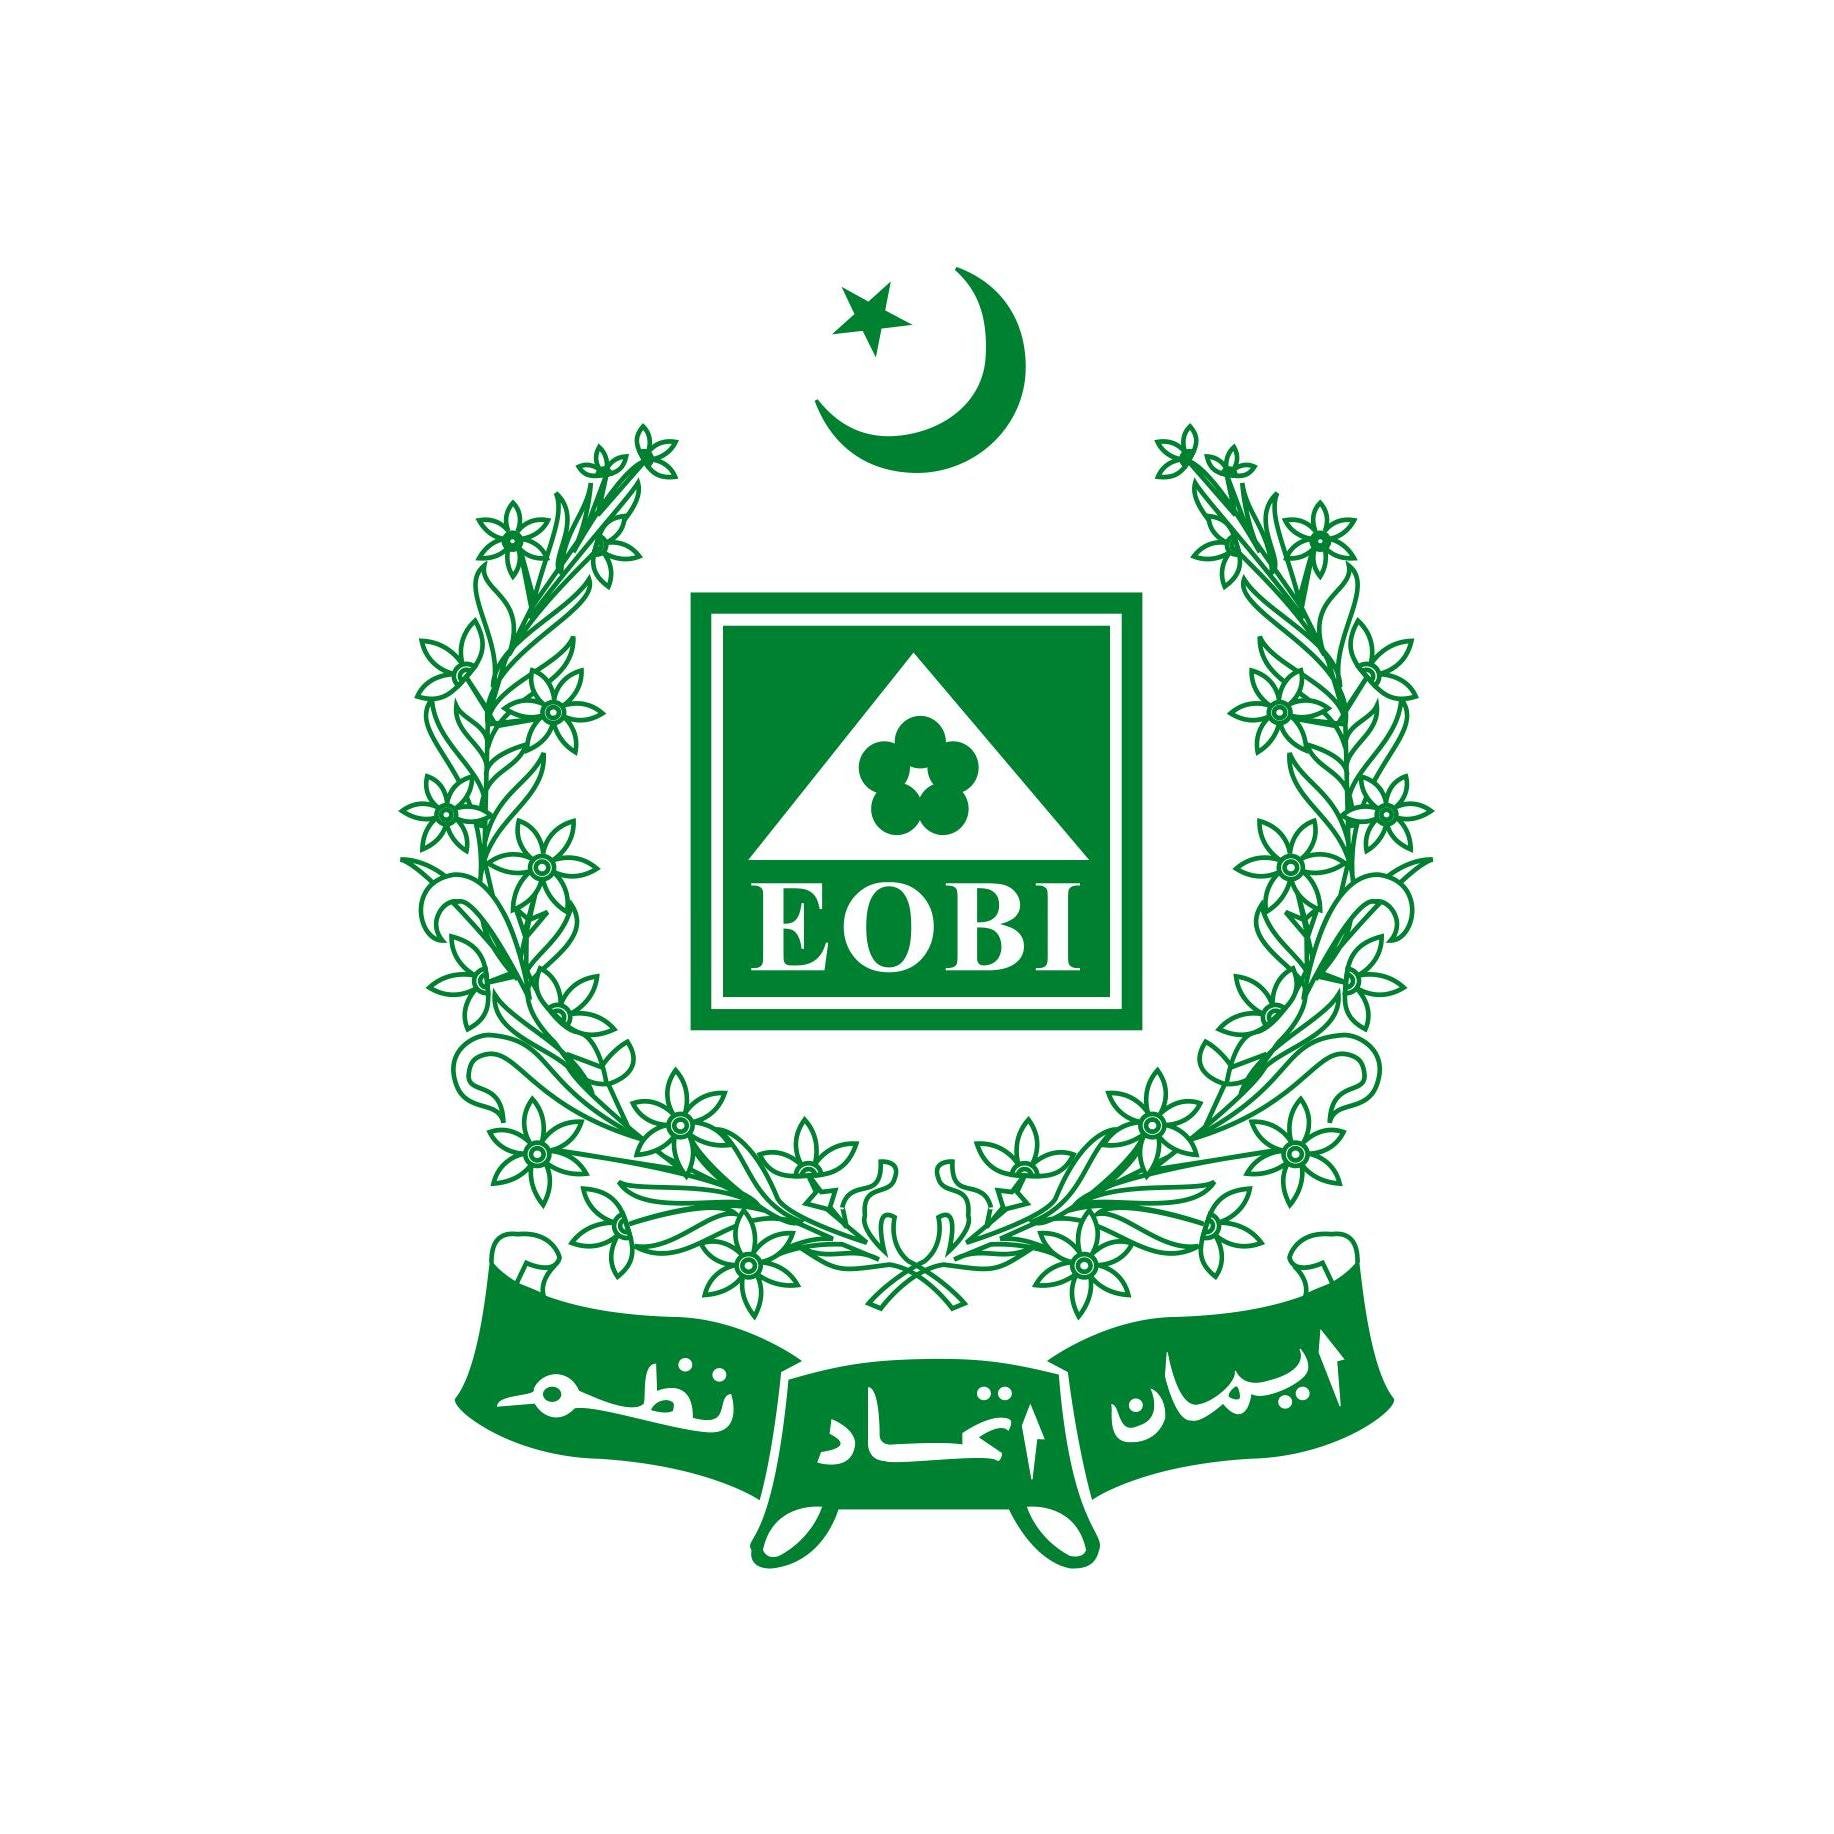 EOBI a national welfare institution provides benefits to employees of private sector.